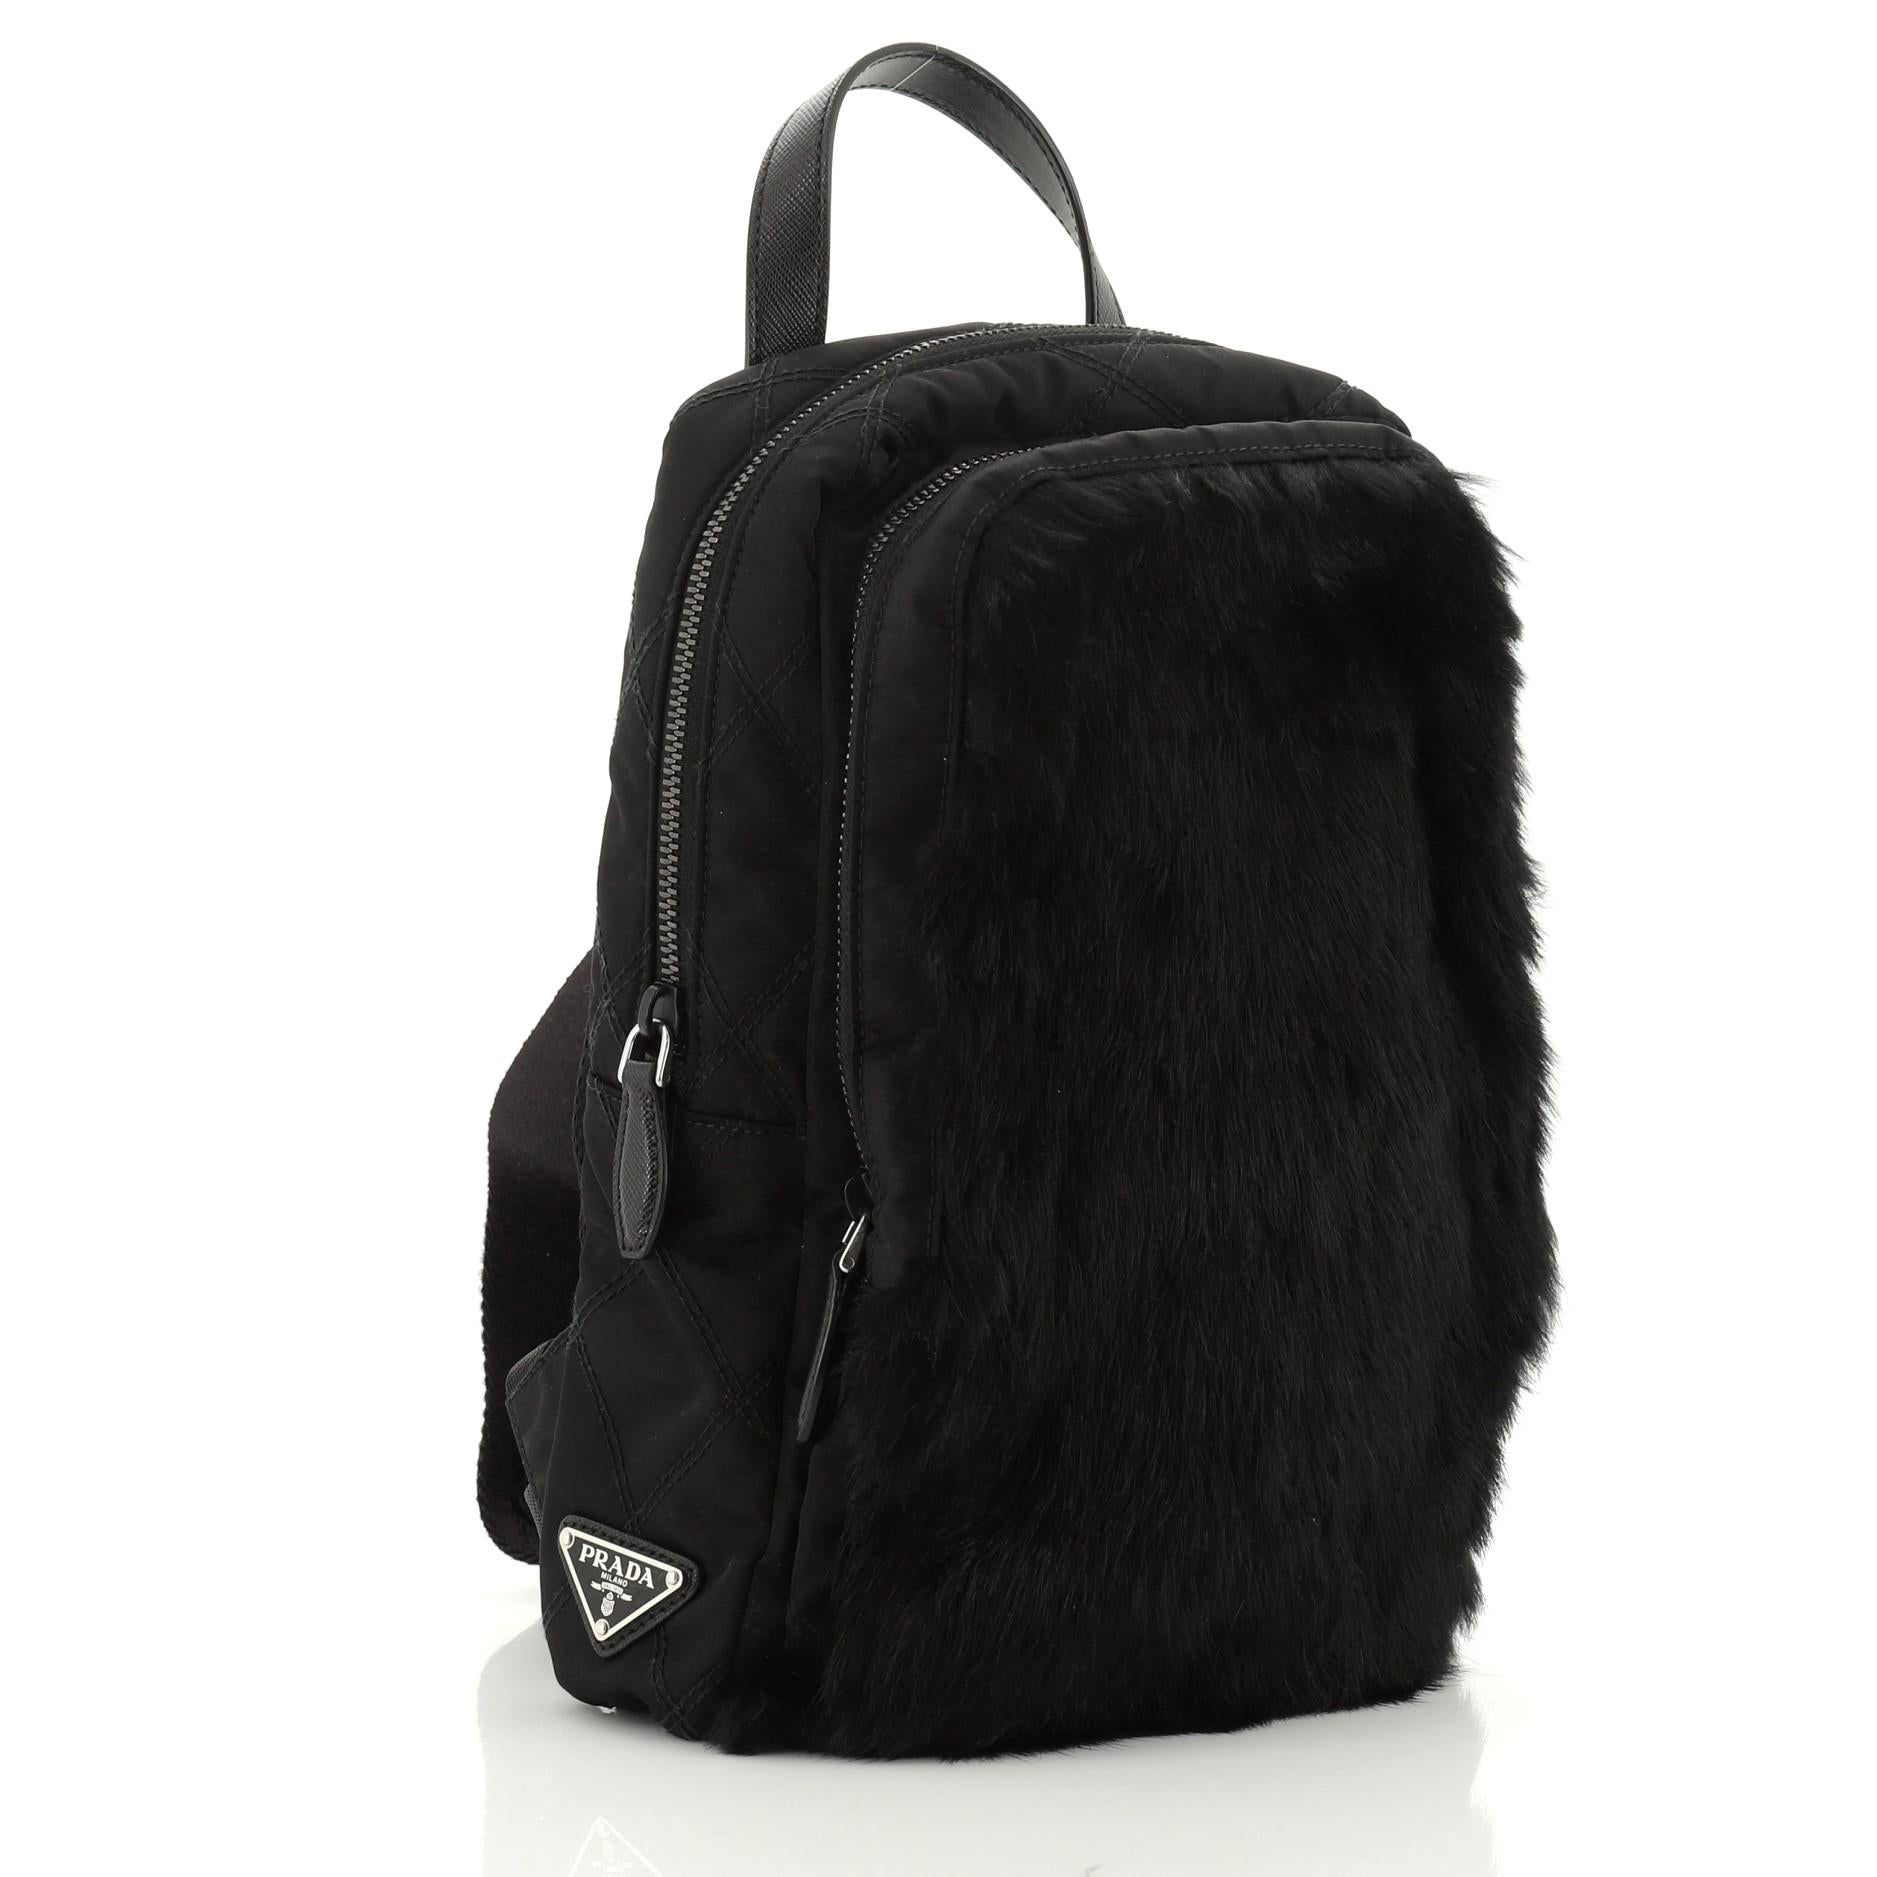 This Prada Sling Backpack Fur with Quilted Tessuto, crafted from black nylon and fur, features a leather top handle, adjustable strap, front zip compartment, and gunmetal-tone hardware. Its zip closure opens to a black nylon interior with side zip